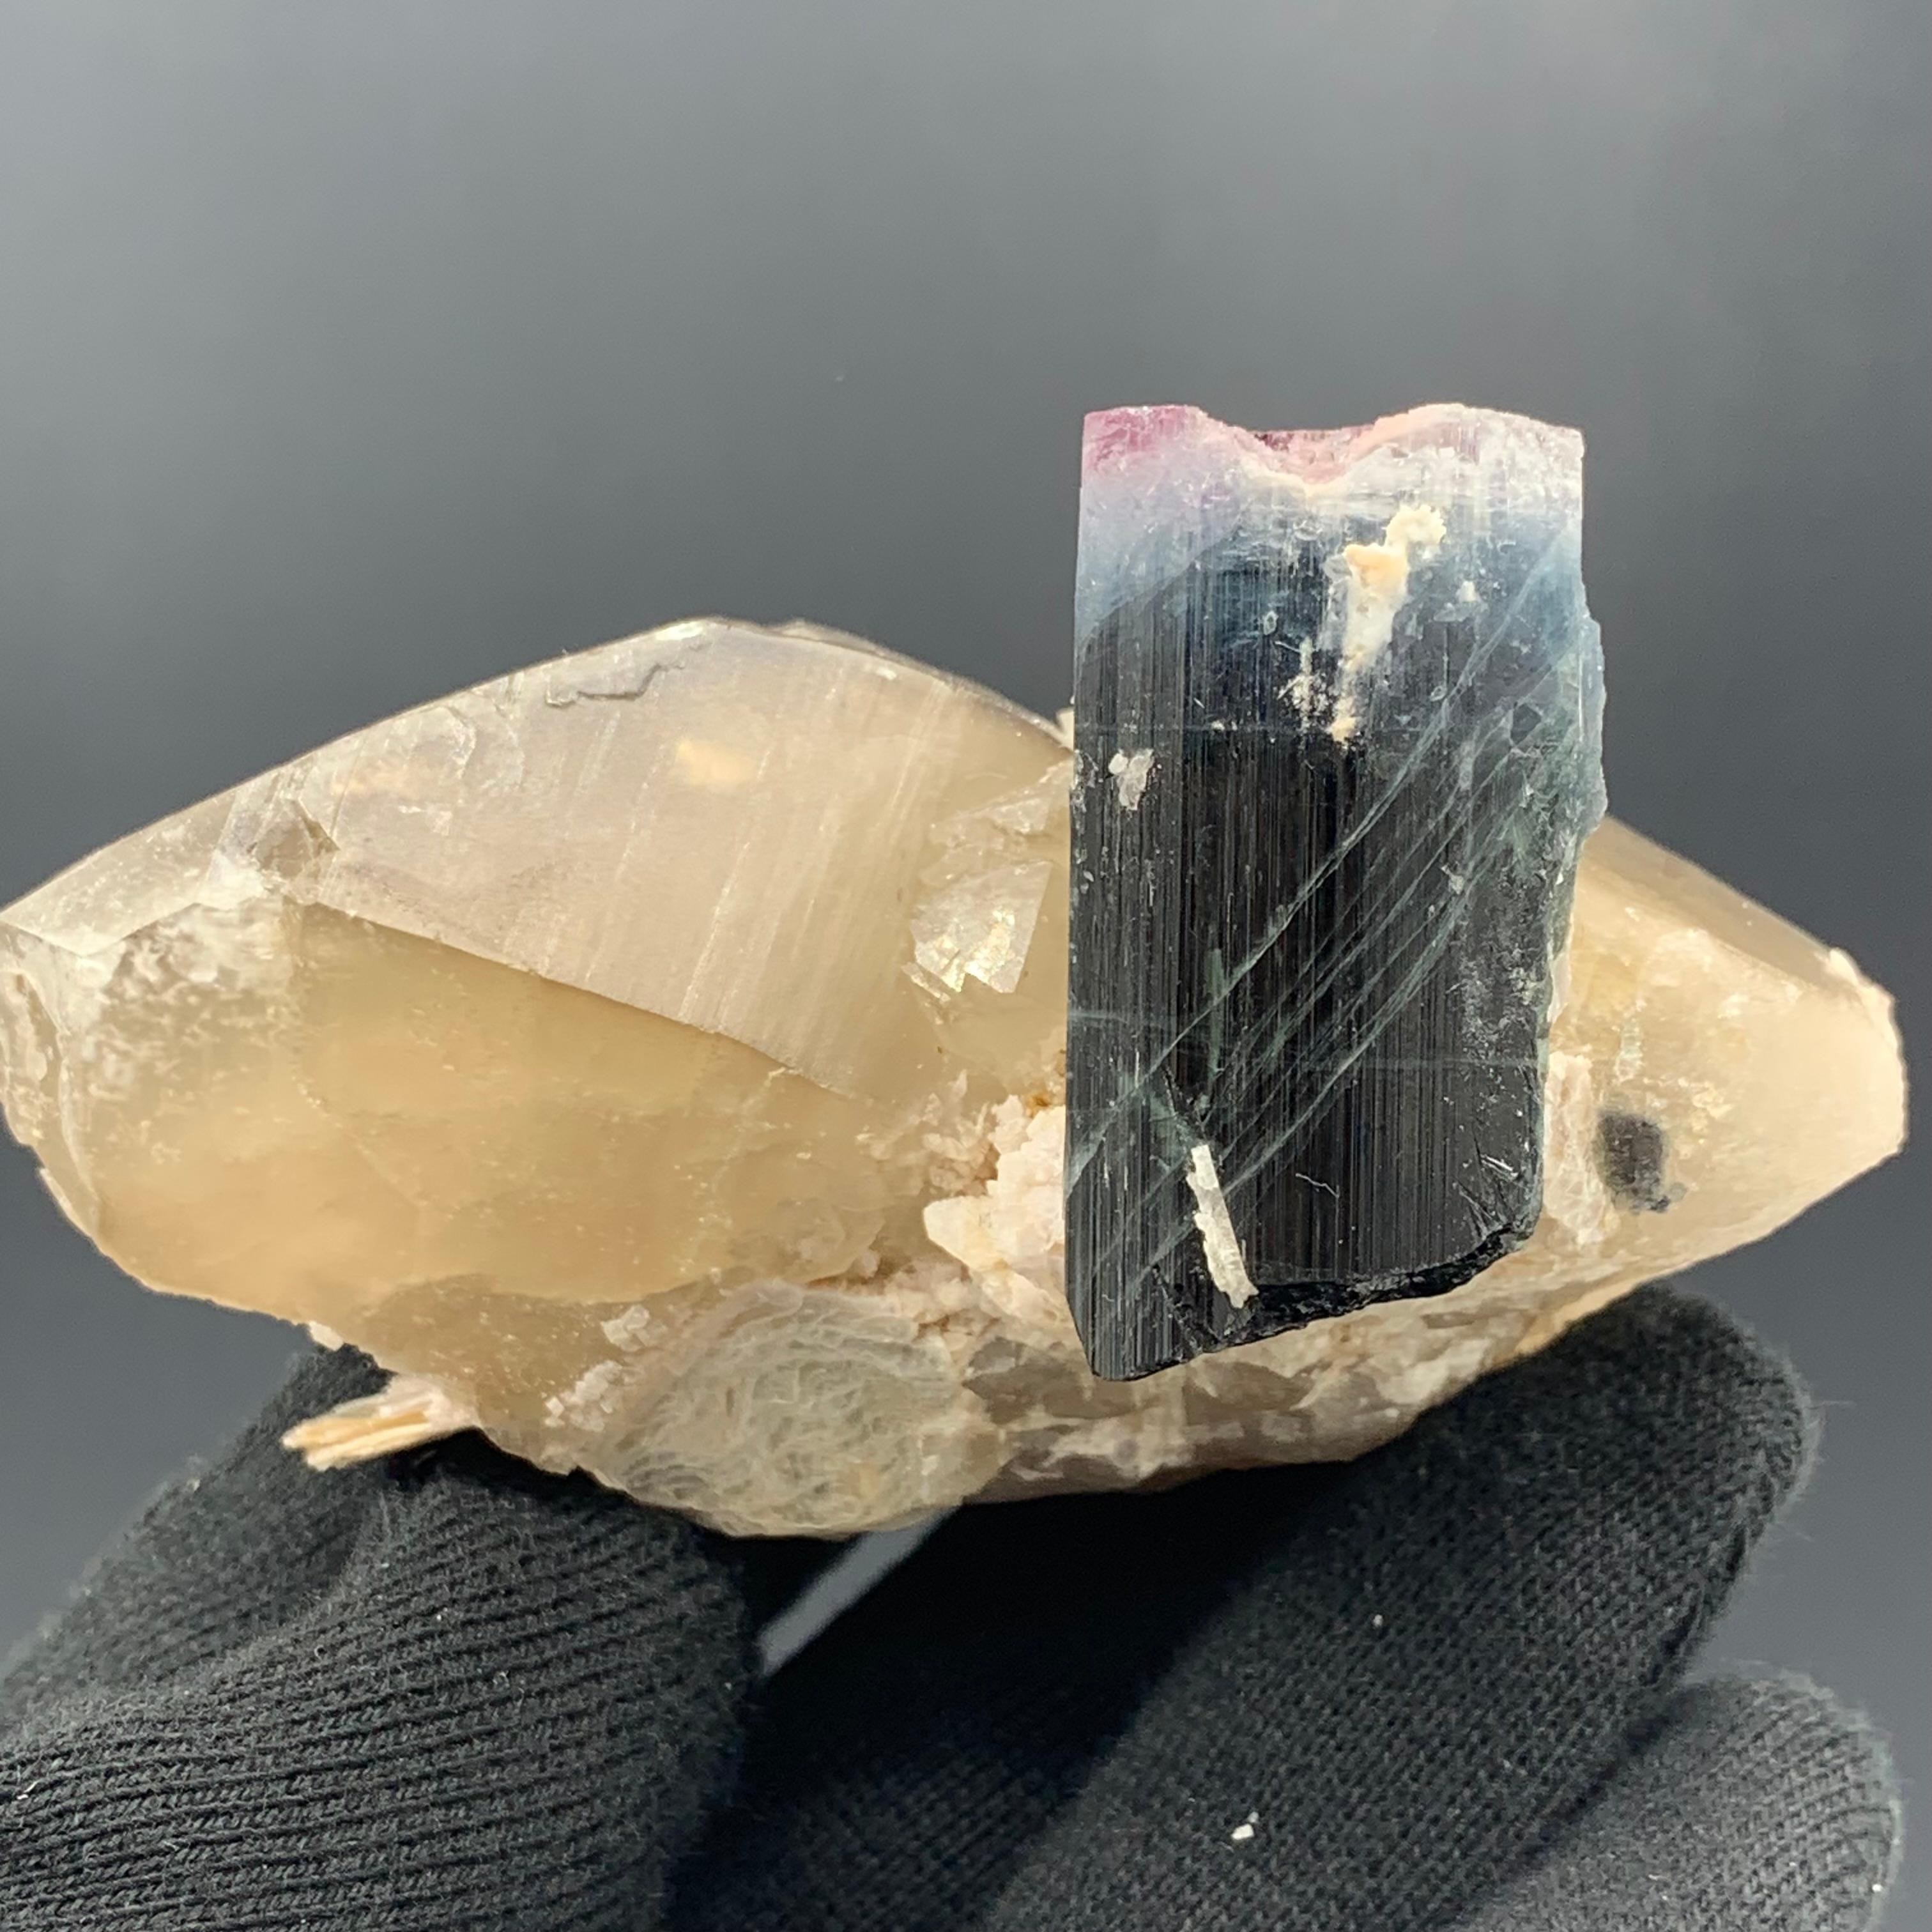 190.04 Gram Gorgeous Tri Color Tourmaline Attached Big Quartz And Muscovite 

Weight: 190.04 Gram 
Dimension: 4.6 x 9 x 5.9 Cm 
Origin: Kunar, Afghanistan 

Tourmaline is a crystalline silicate mineral group in which boron is compounded with